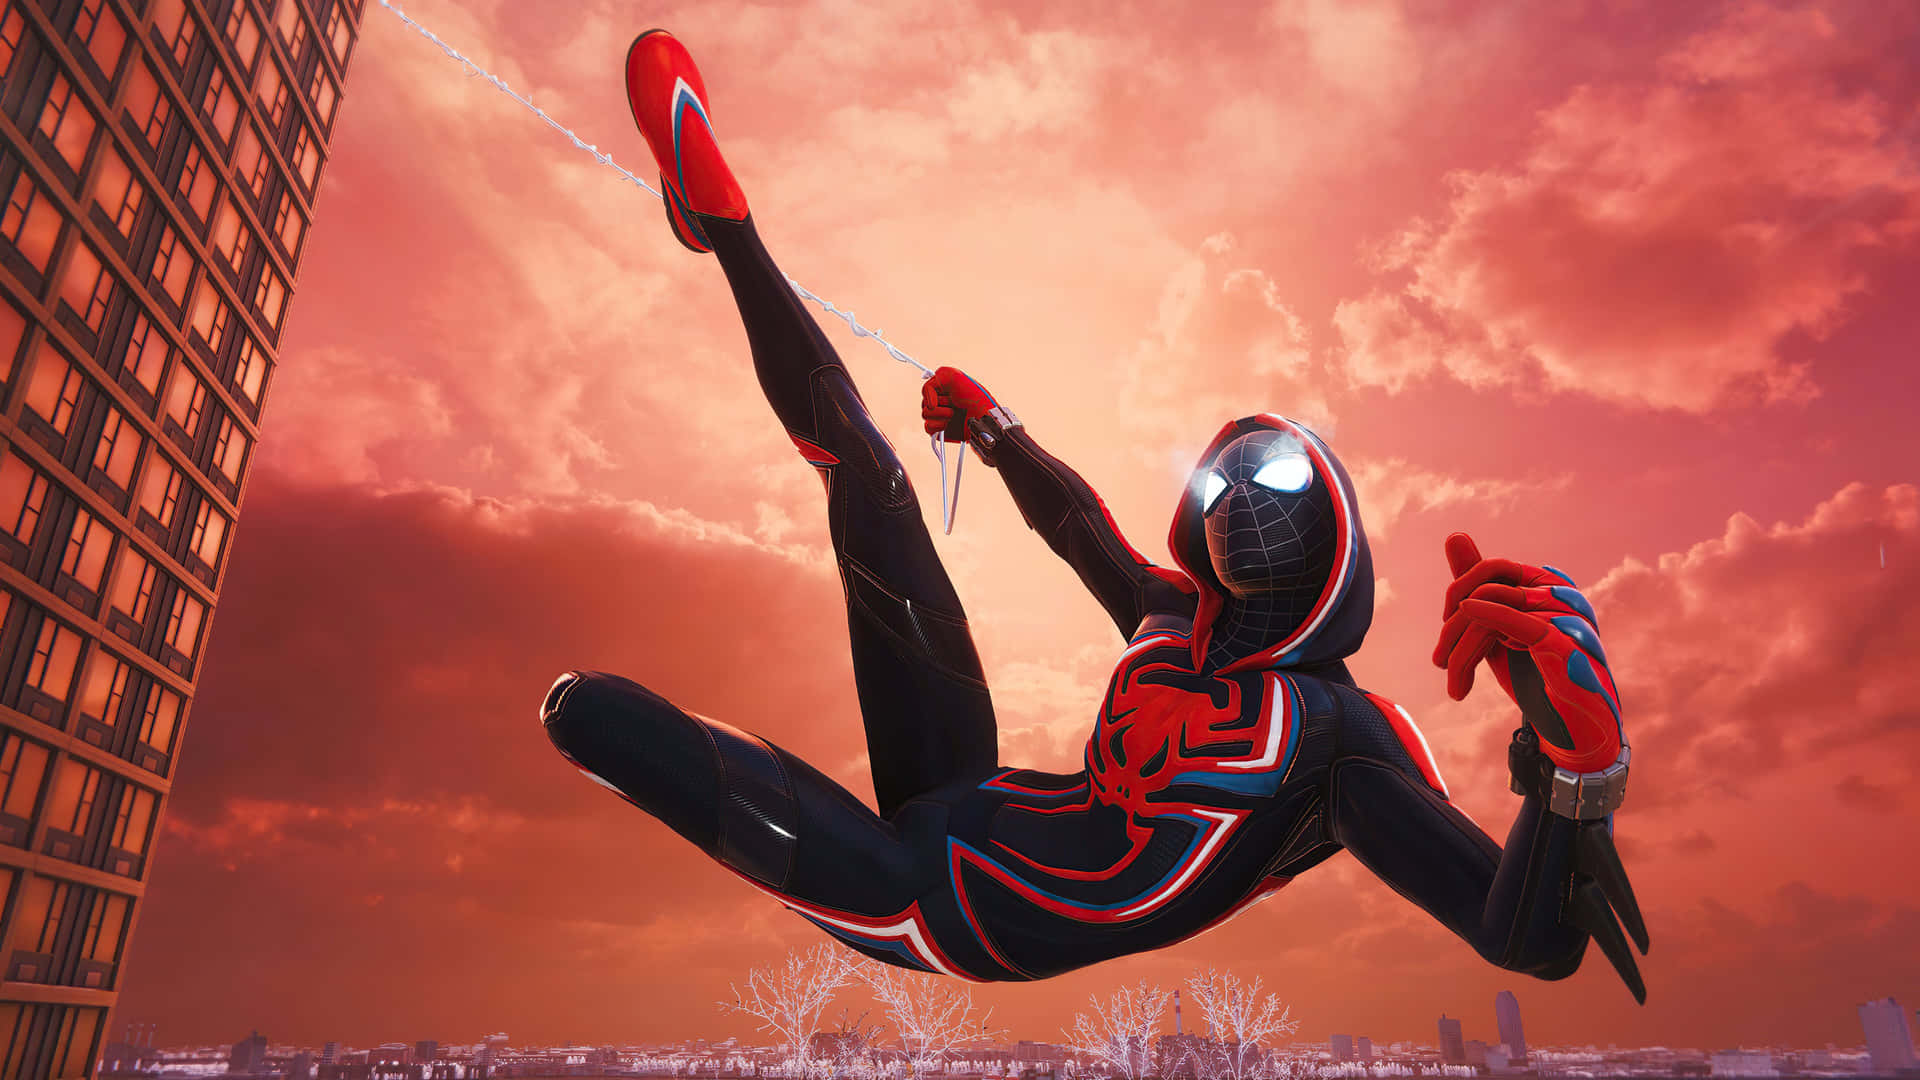 "Miles Morales, the next chapter of your favorite Spider-Man story".